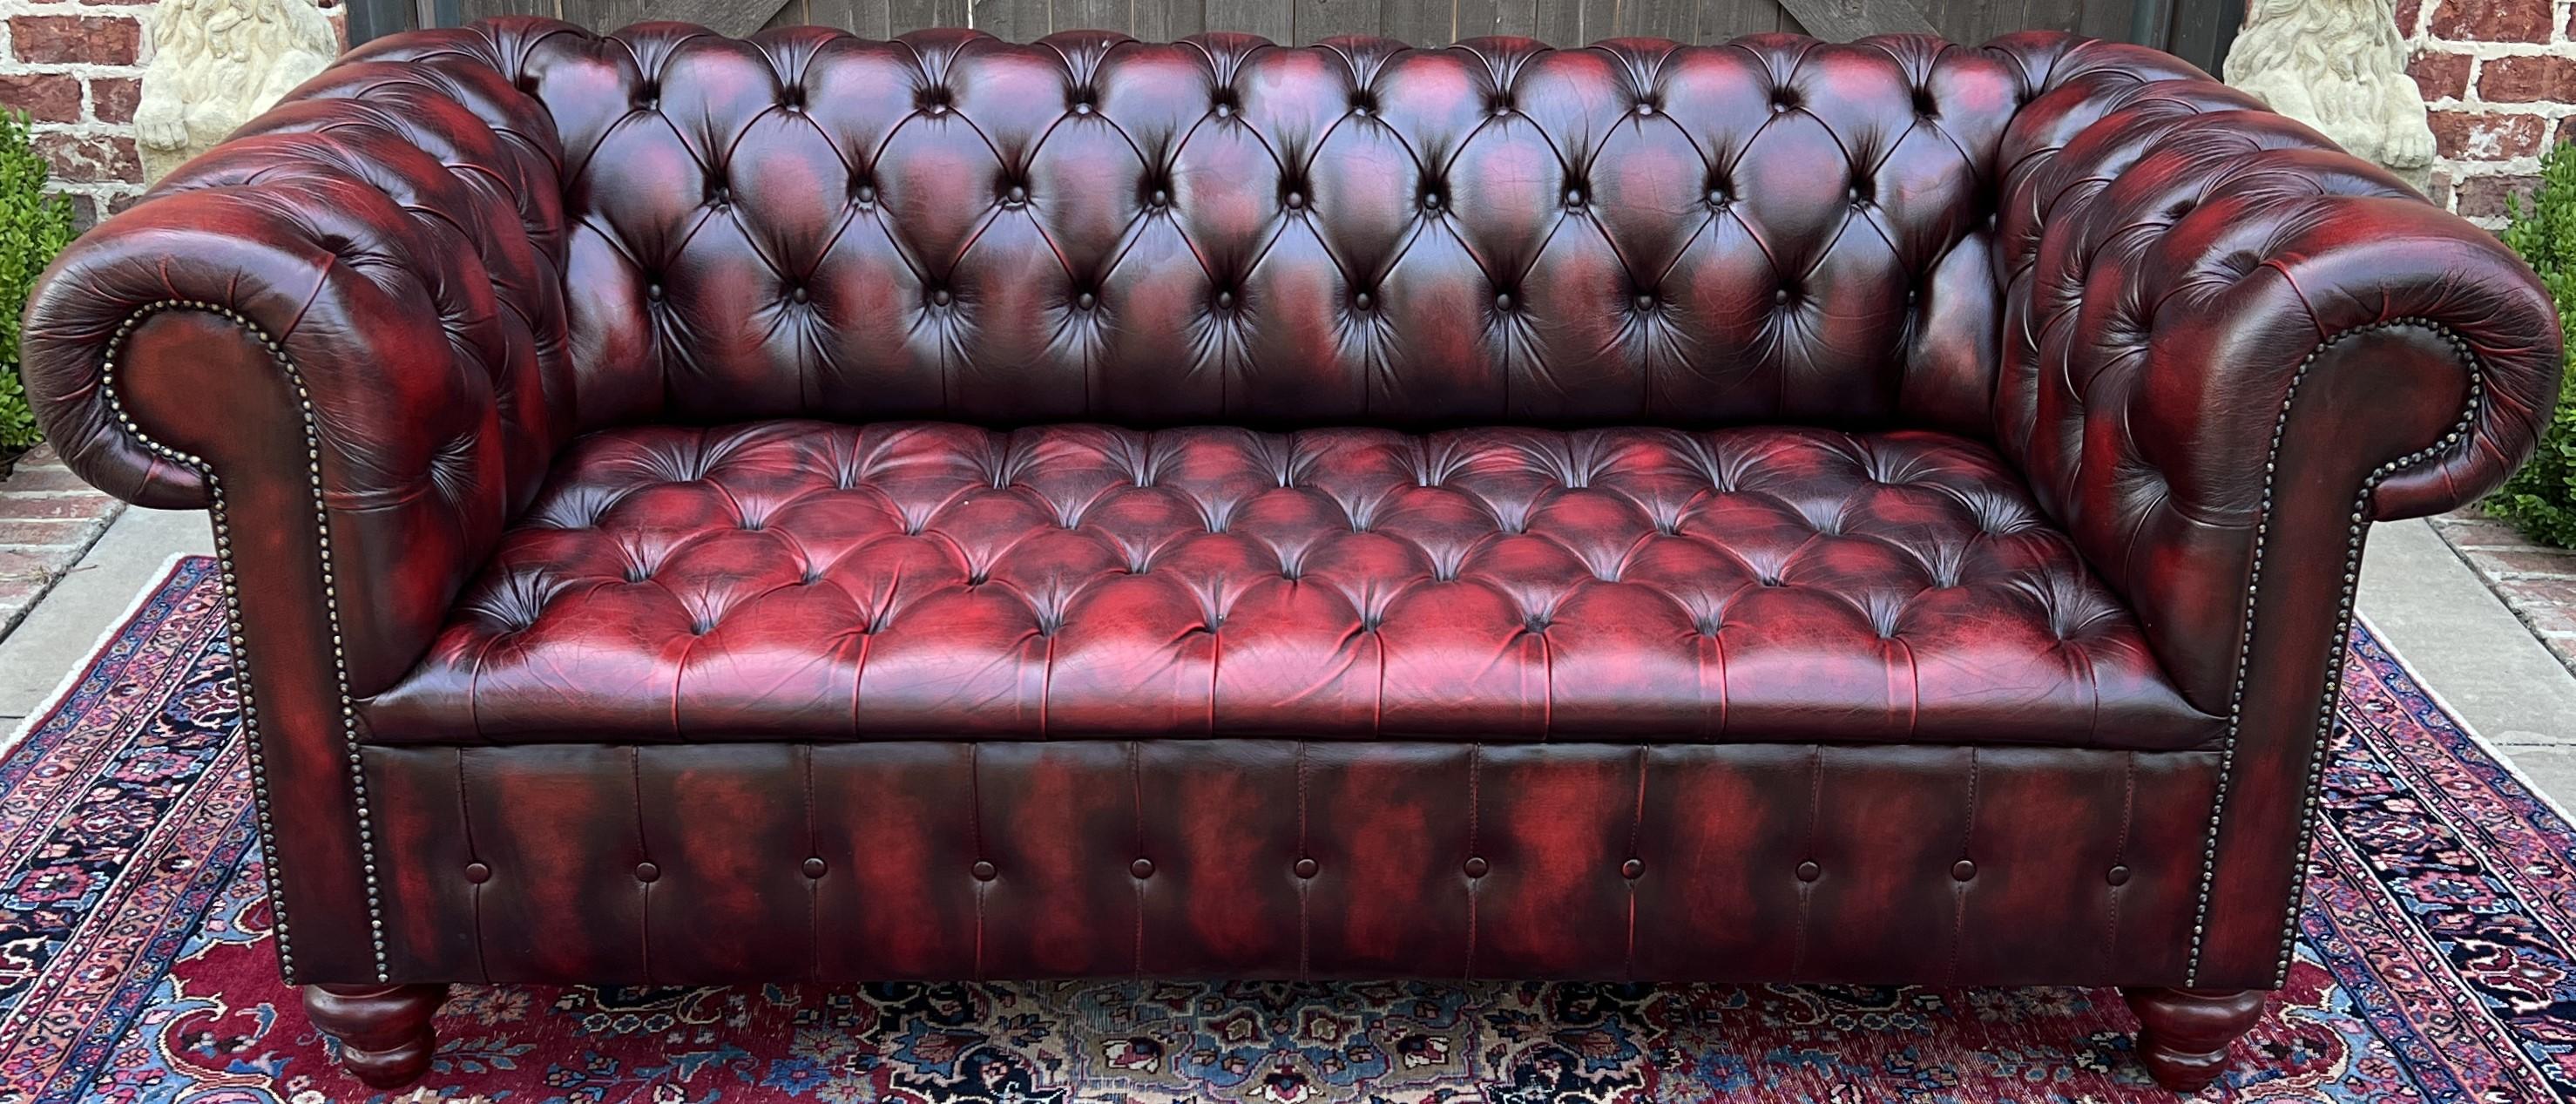 Vintage English Chesterfield Sofa Leather Tufted Seat Oxblood Red Mid-Century #1 4